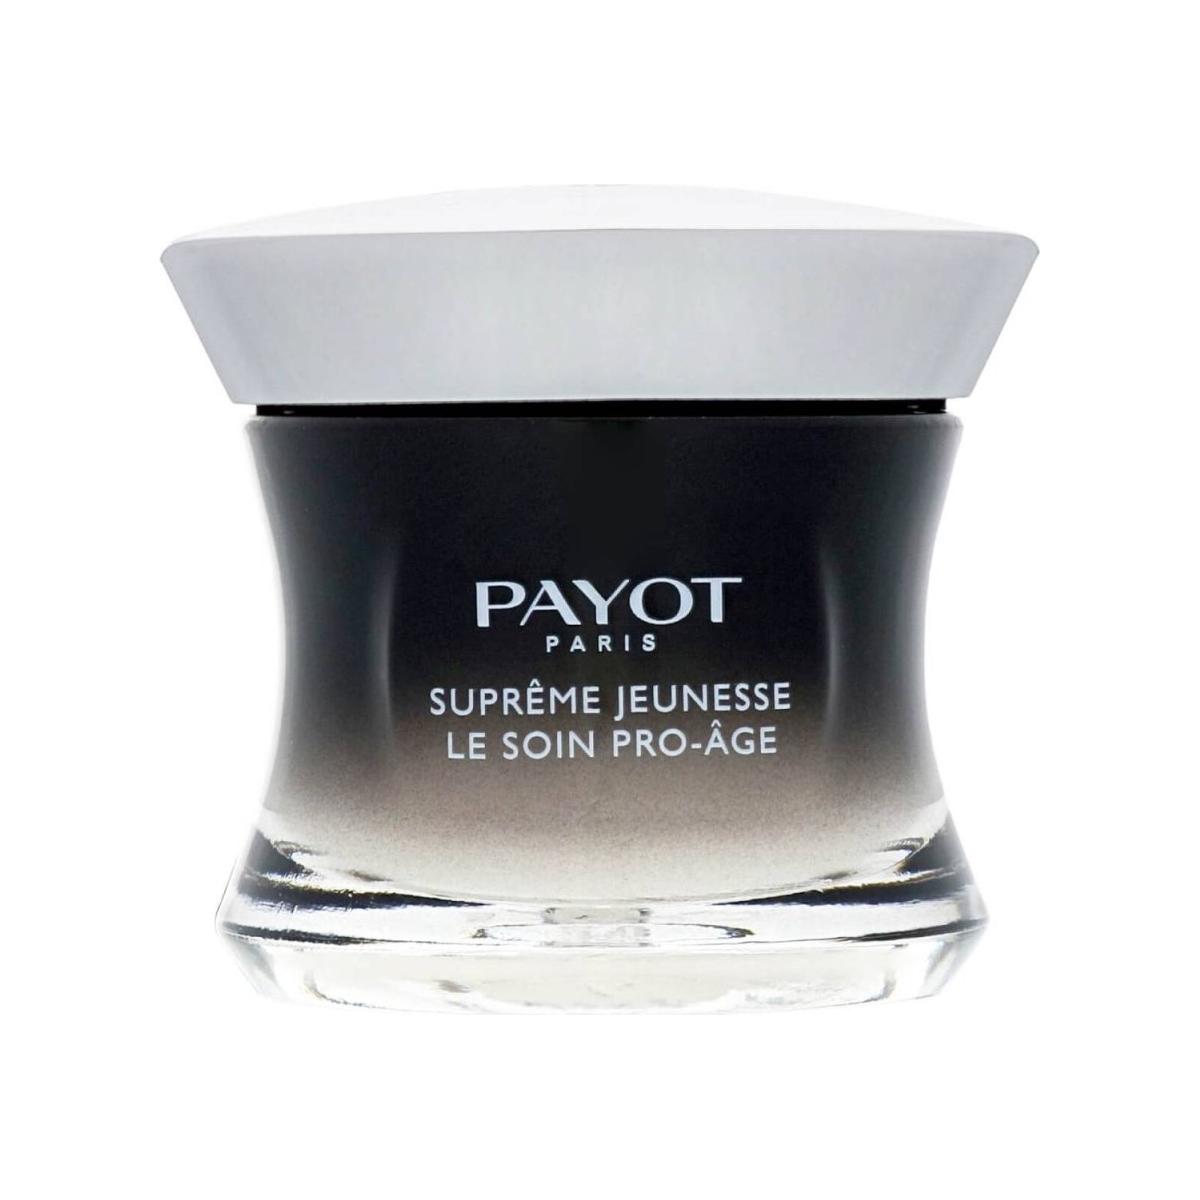 Payot Supreme Jeunesse Le Soin Pro Age 50ml - Glam Global UK